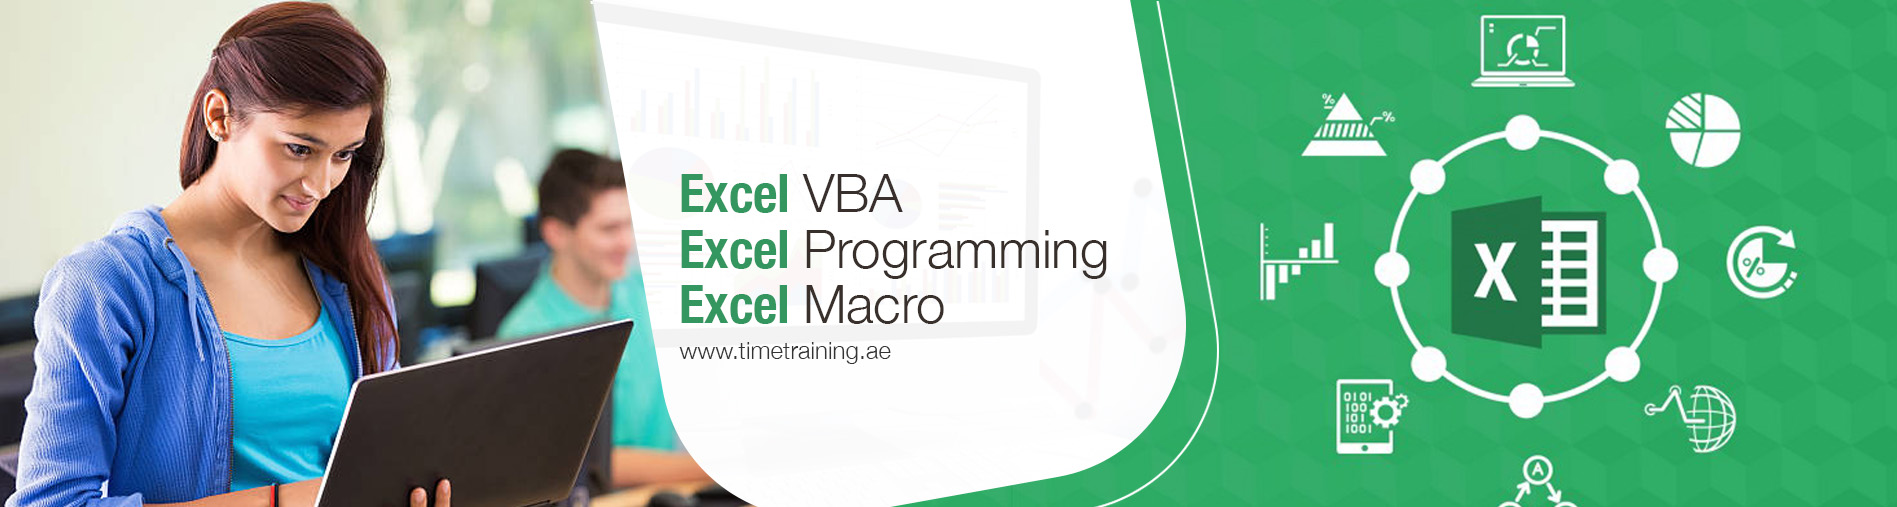 excel vba training in abu dhabi, excel vba course, excel programming course,